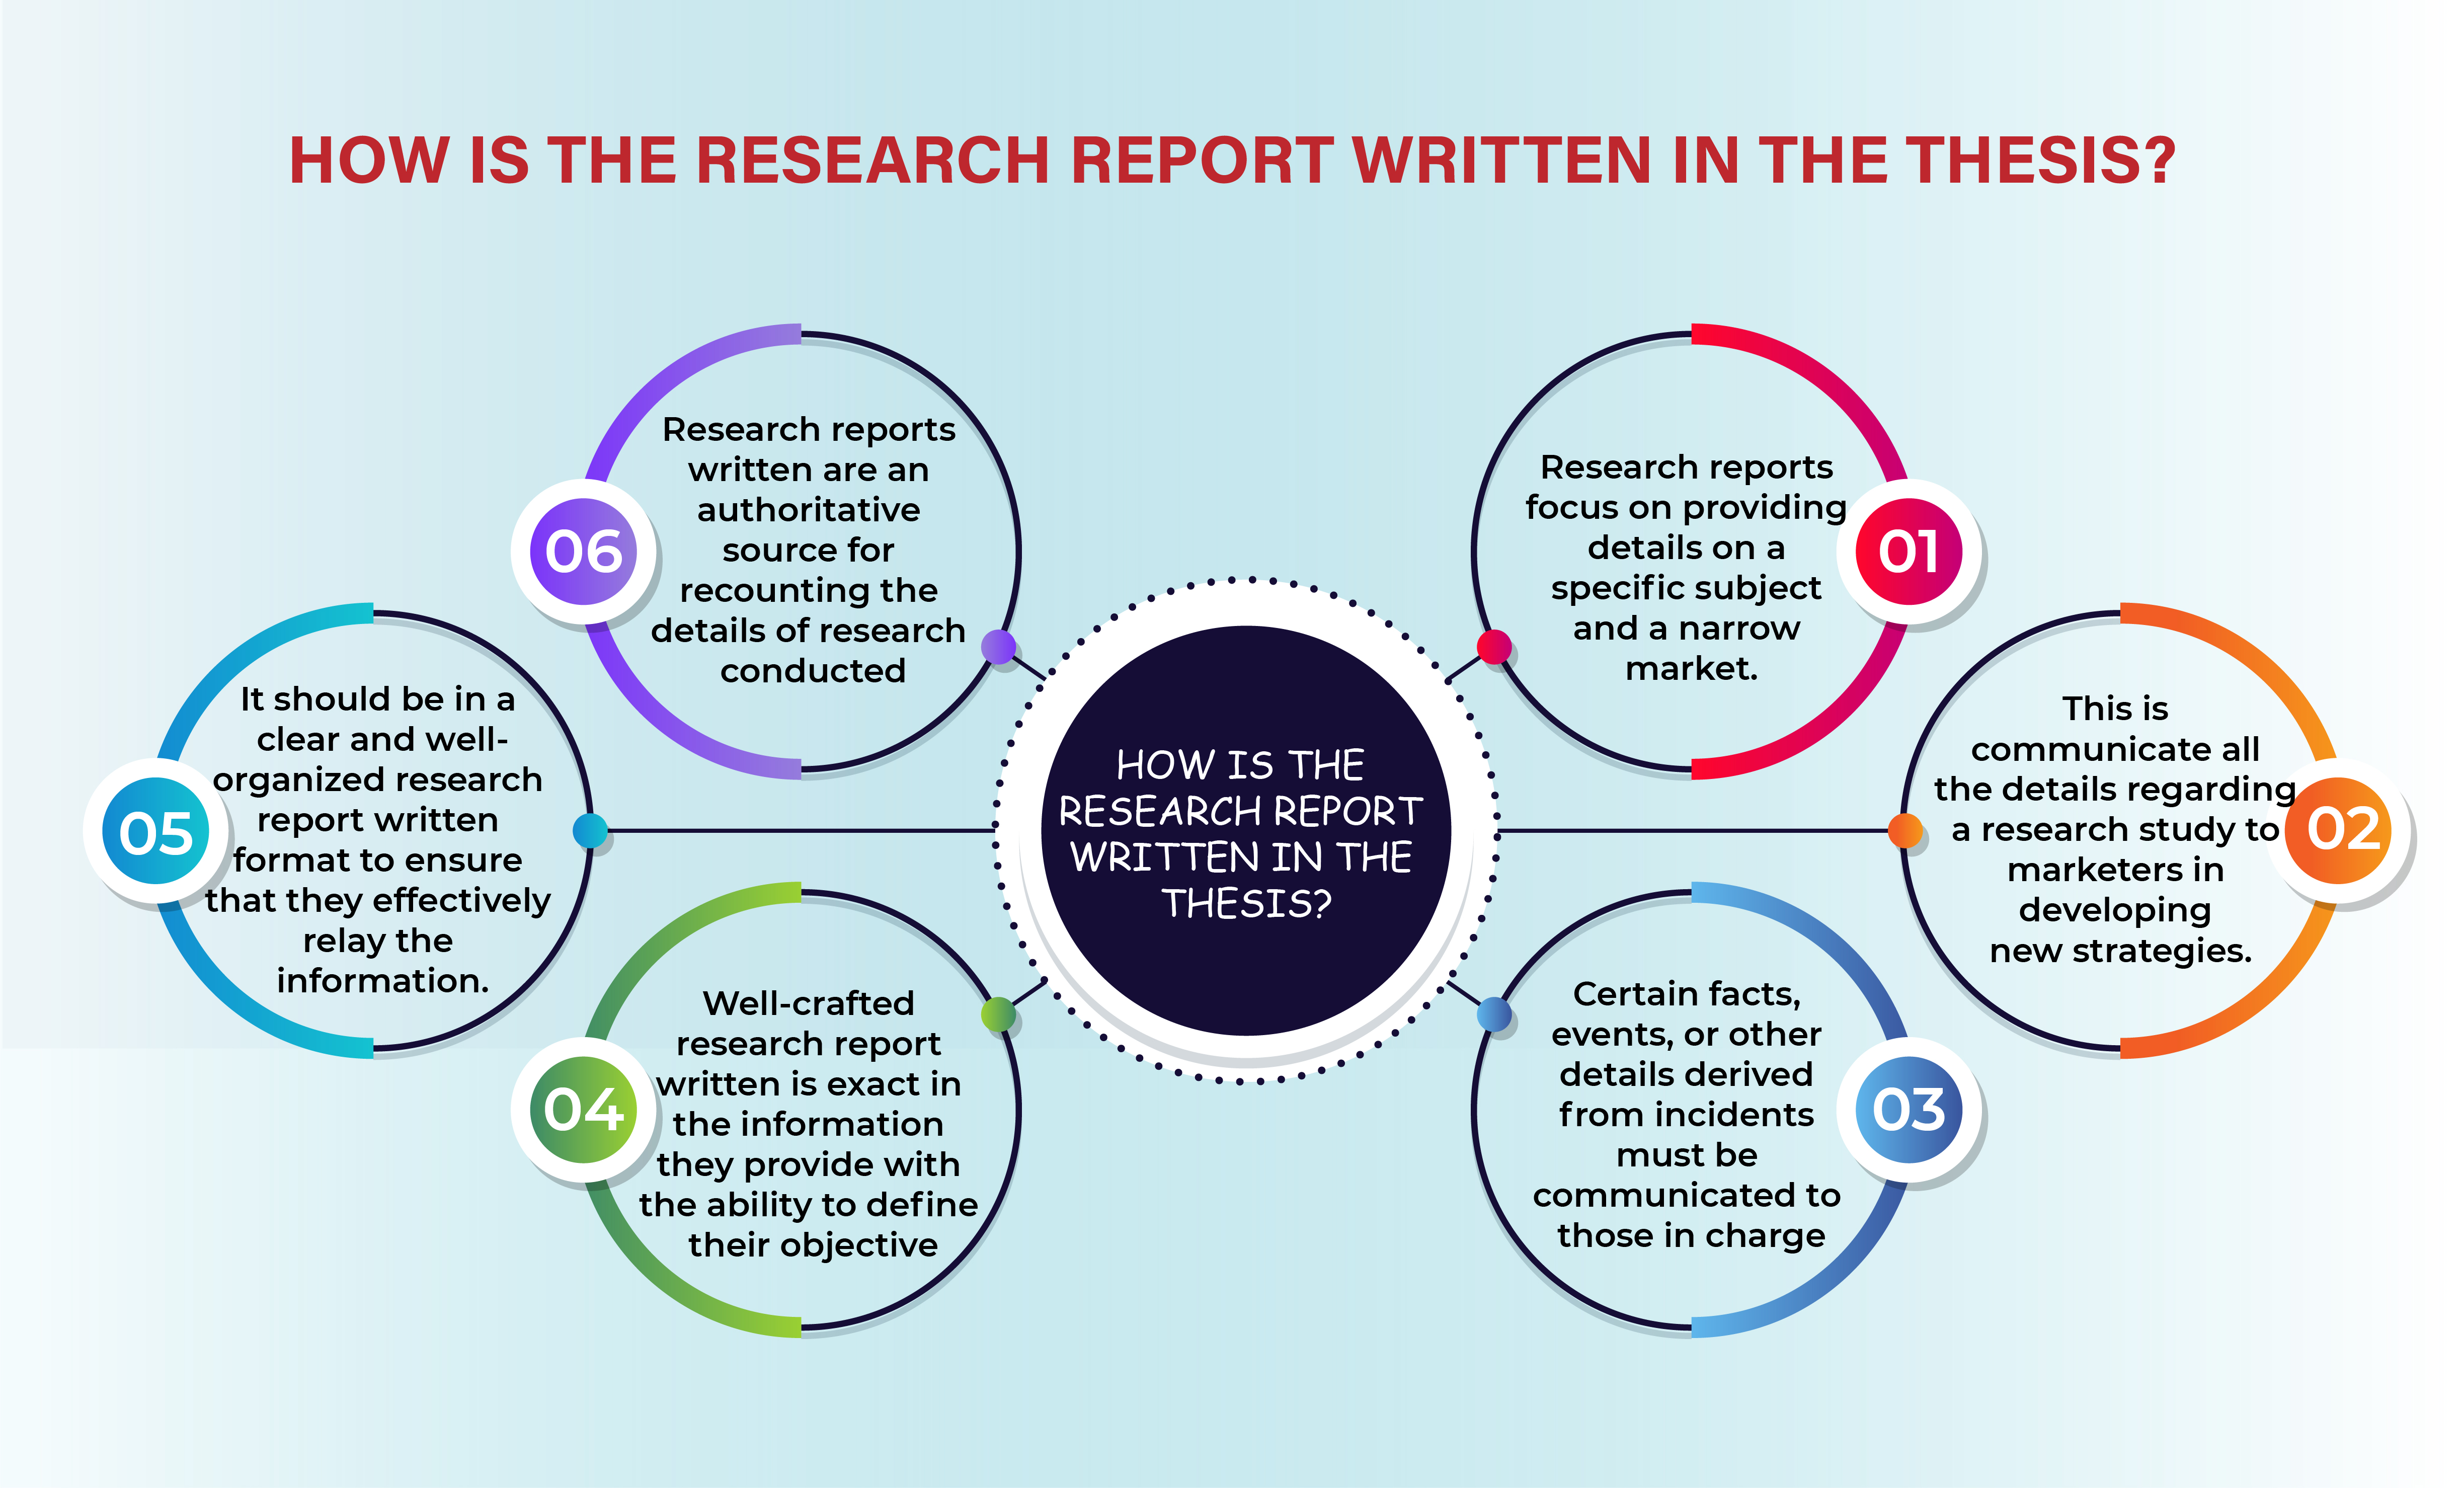 How is the research report written